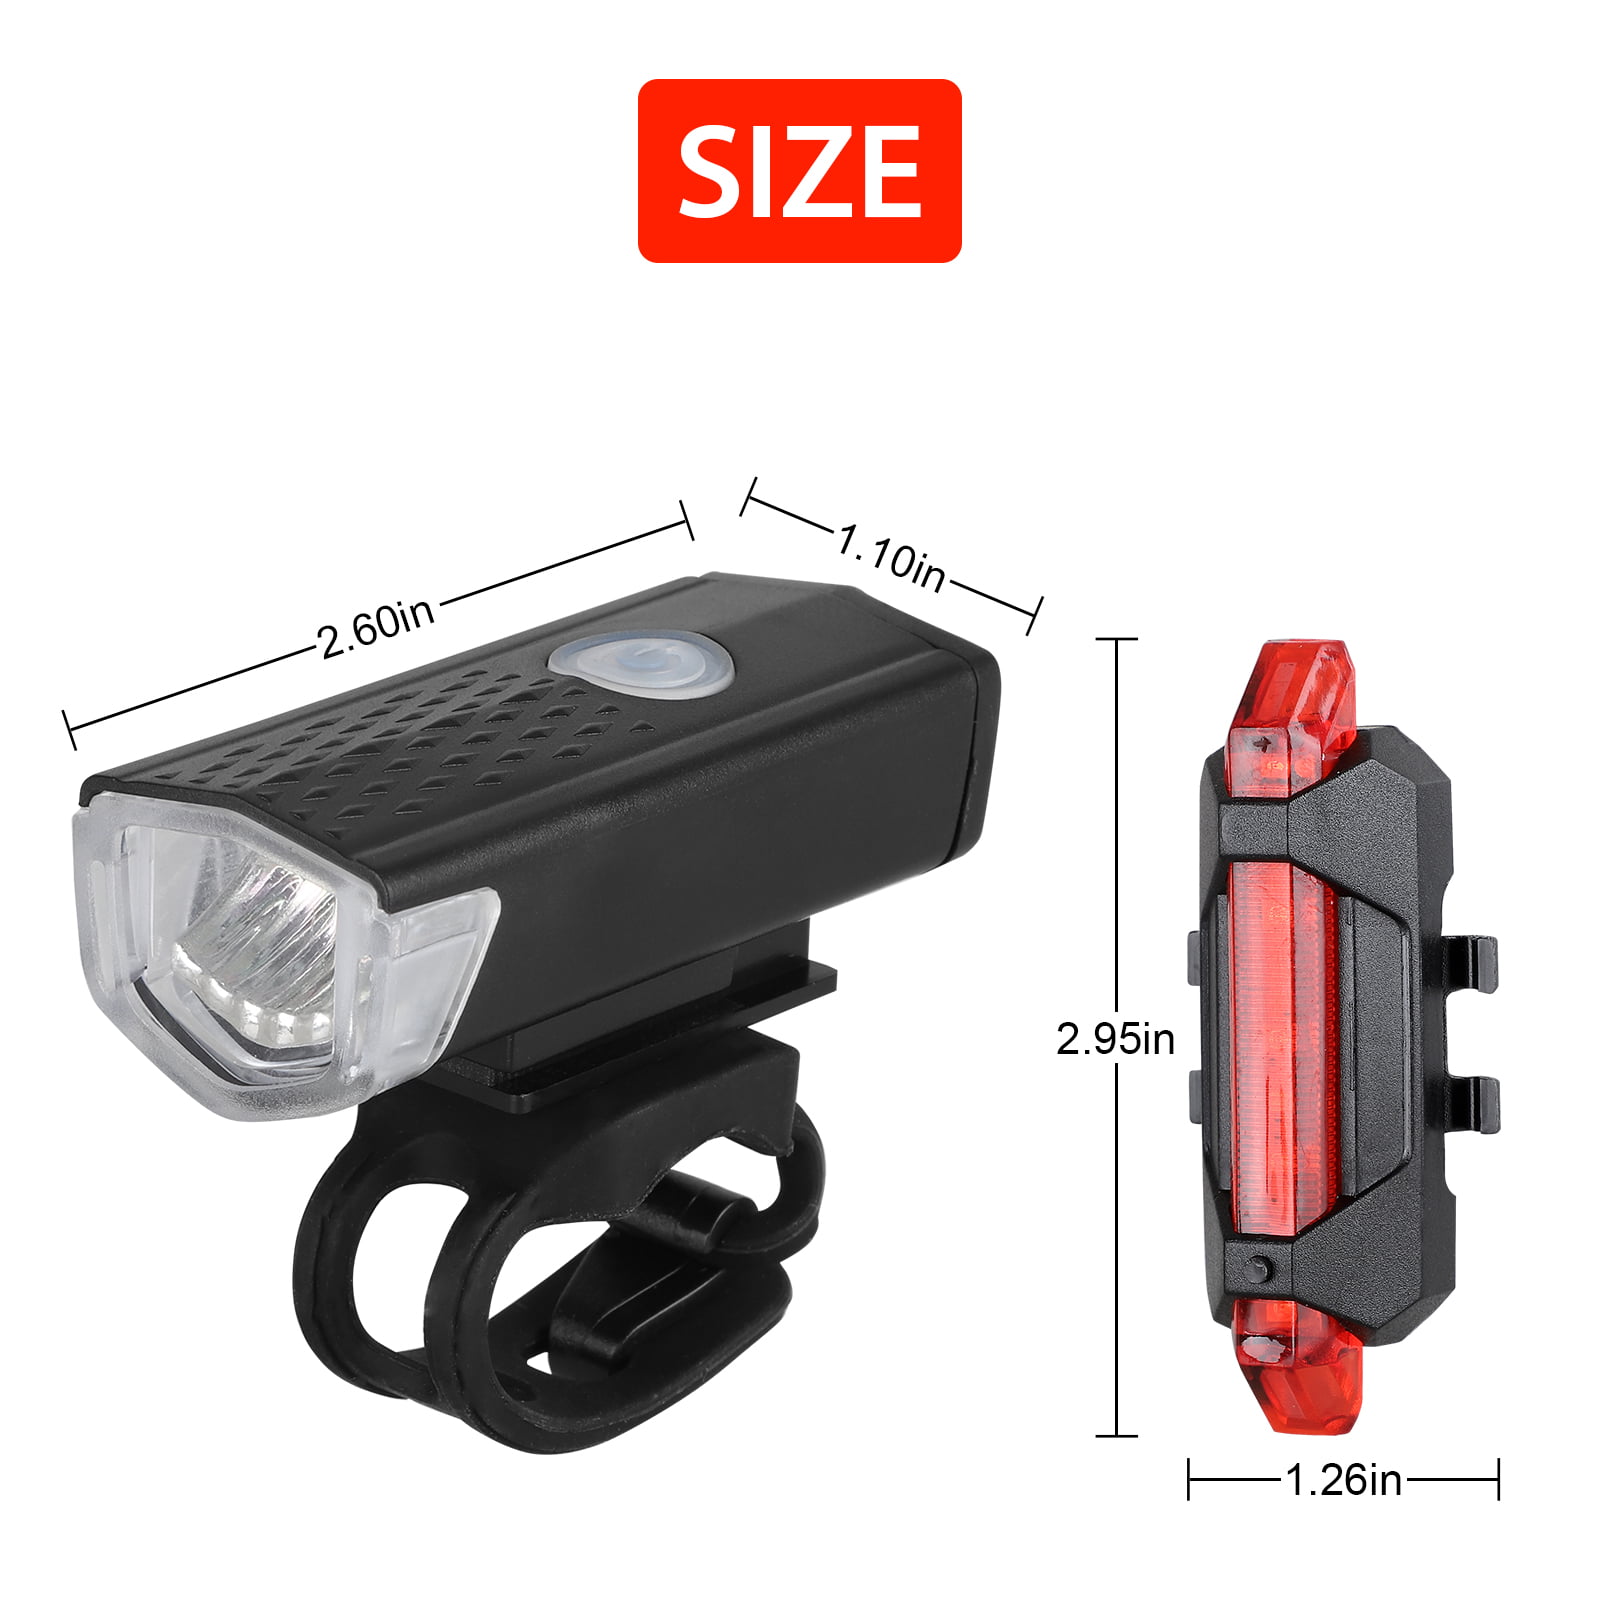 SHIVEXIM USB Rechargeable Bike Horn And Light Super Bright 3 Modes LED  Front Light and LED Lights Cycle Bike Safety Set Taillight LED Front Rear  Light Combo - Buy SHIVEXIM USB Rechargeable